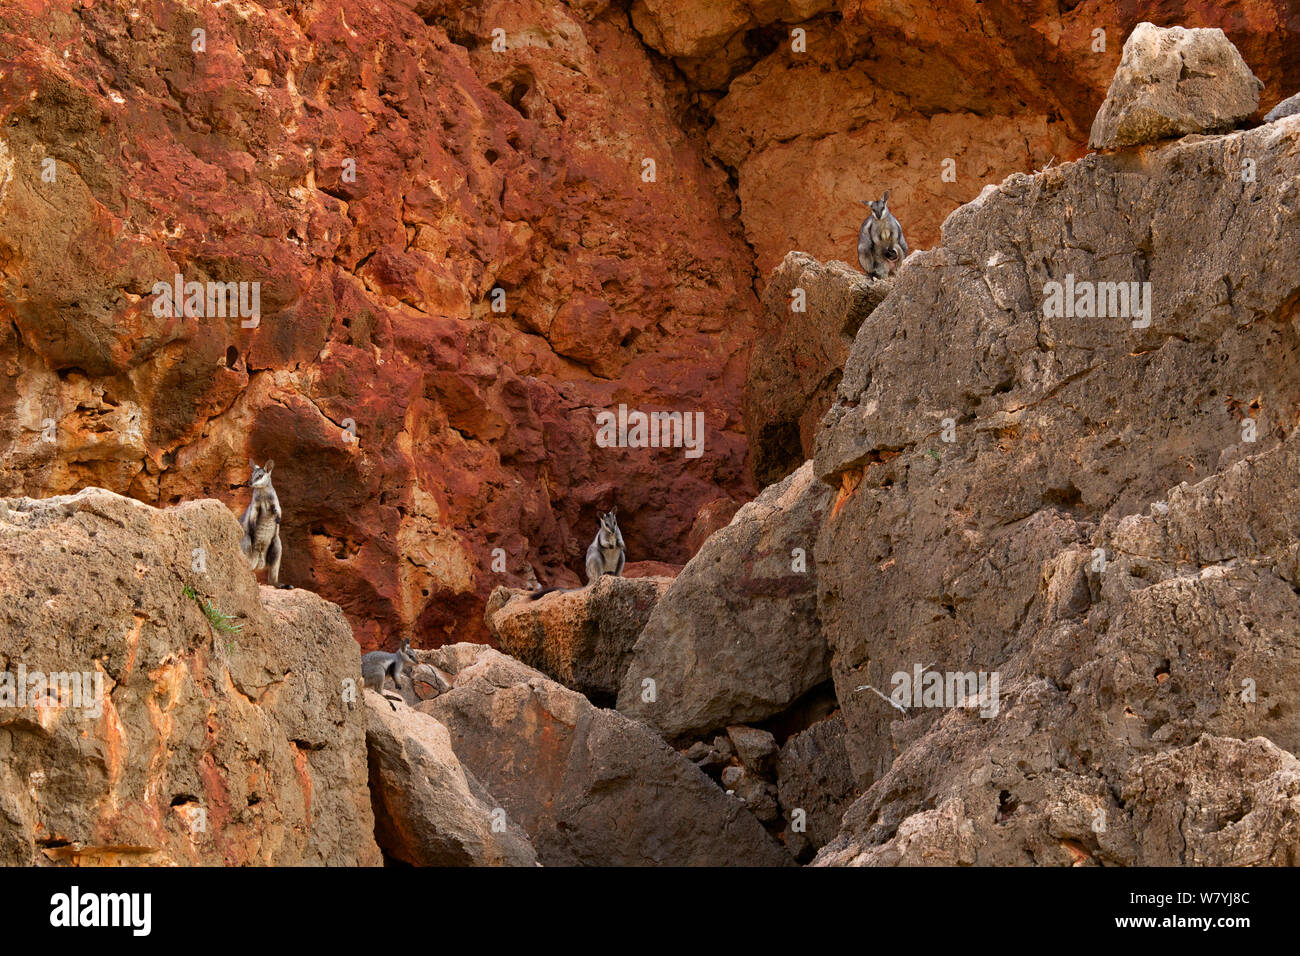 Black-footed rock wallaby (Petrogale lateralis) group, Cape range National Park, Exmouth, Western Australia Stock Photo